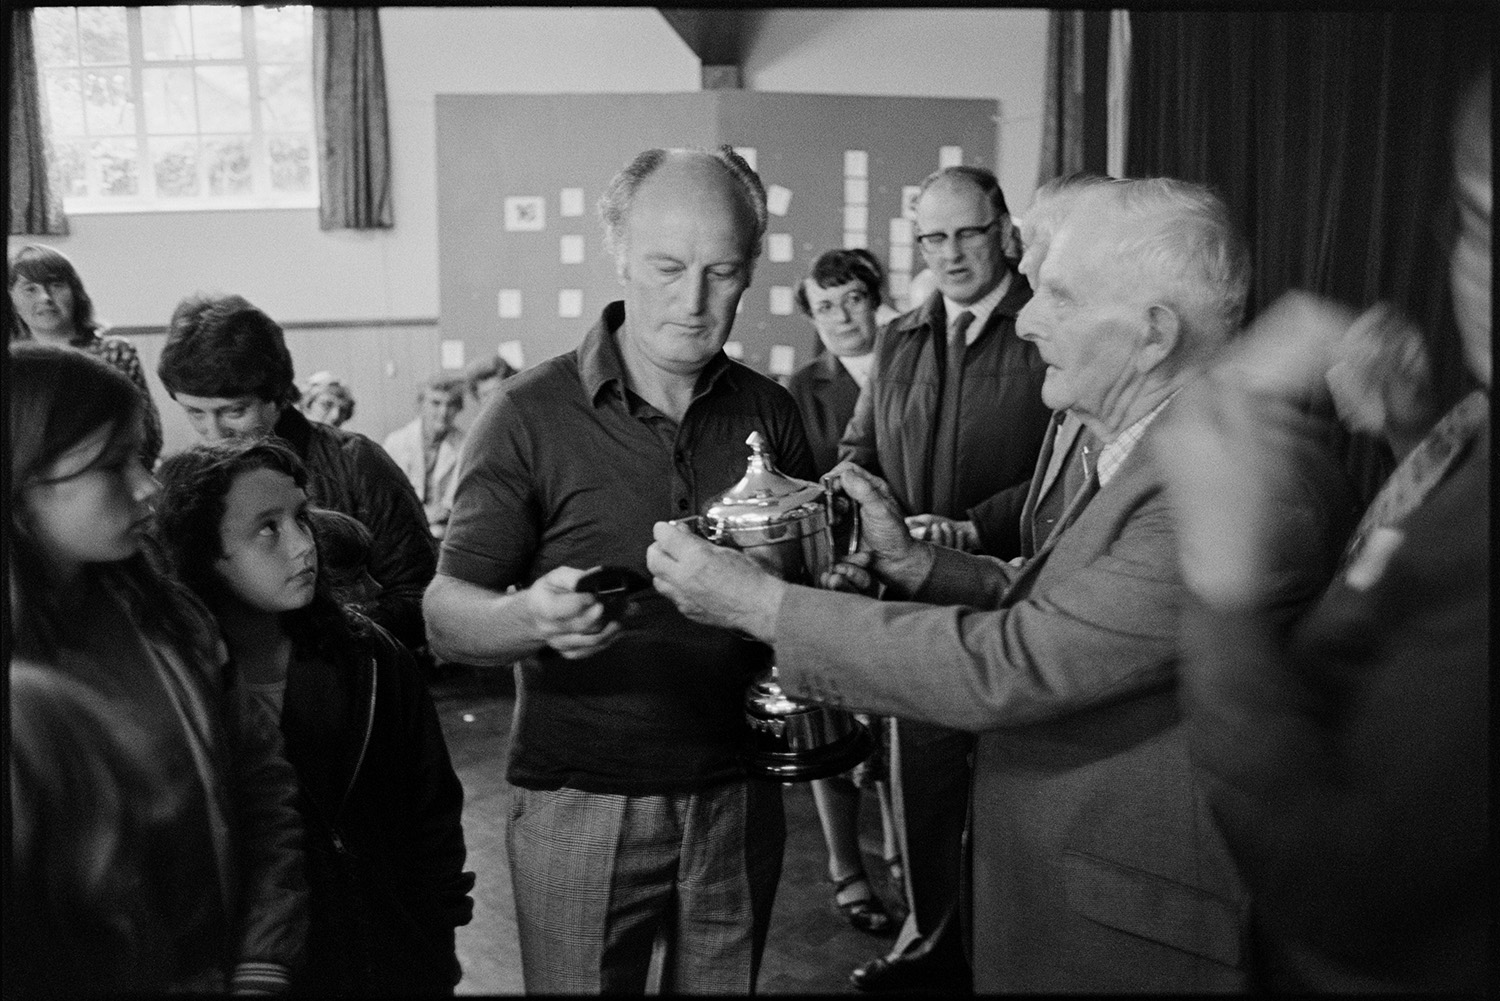 Cup winners after flower show. 
[Michael Mitchell being presented with a silver cup for his entry in the Dolton Flower Show at Dolton Village Hall. Children, Men and women are watching him.]